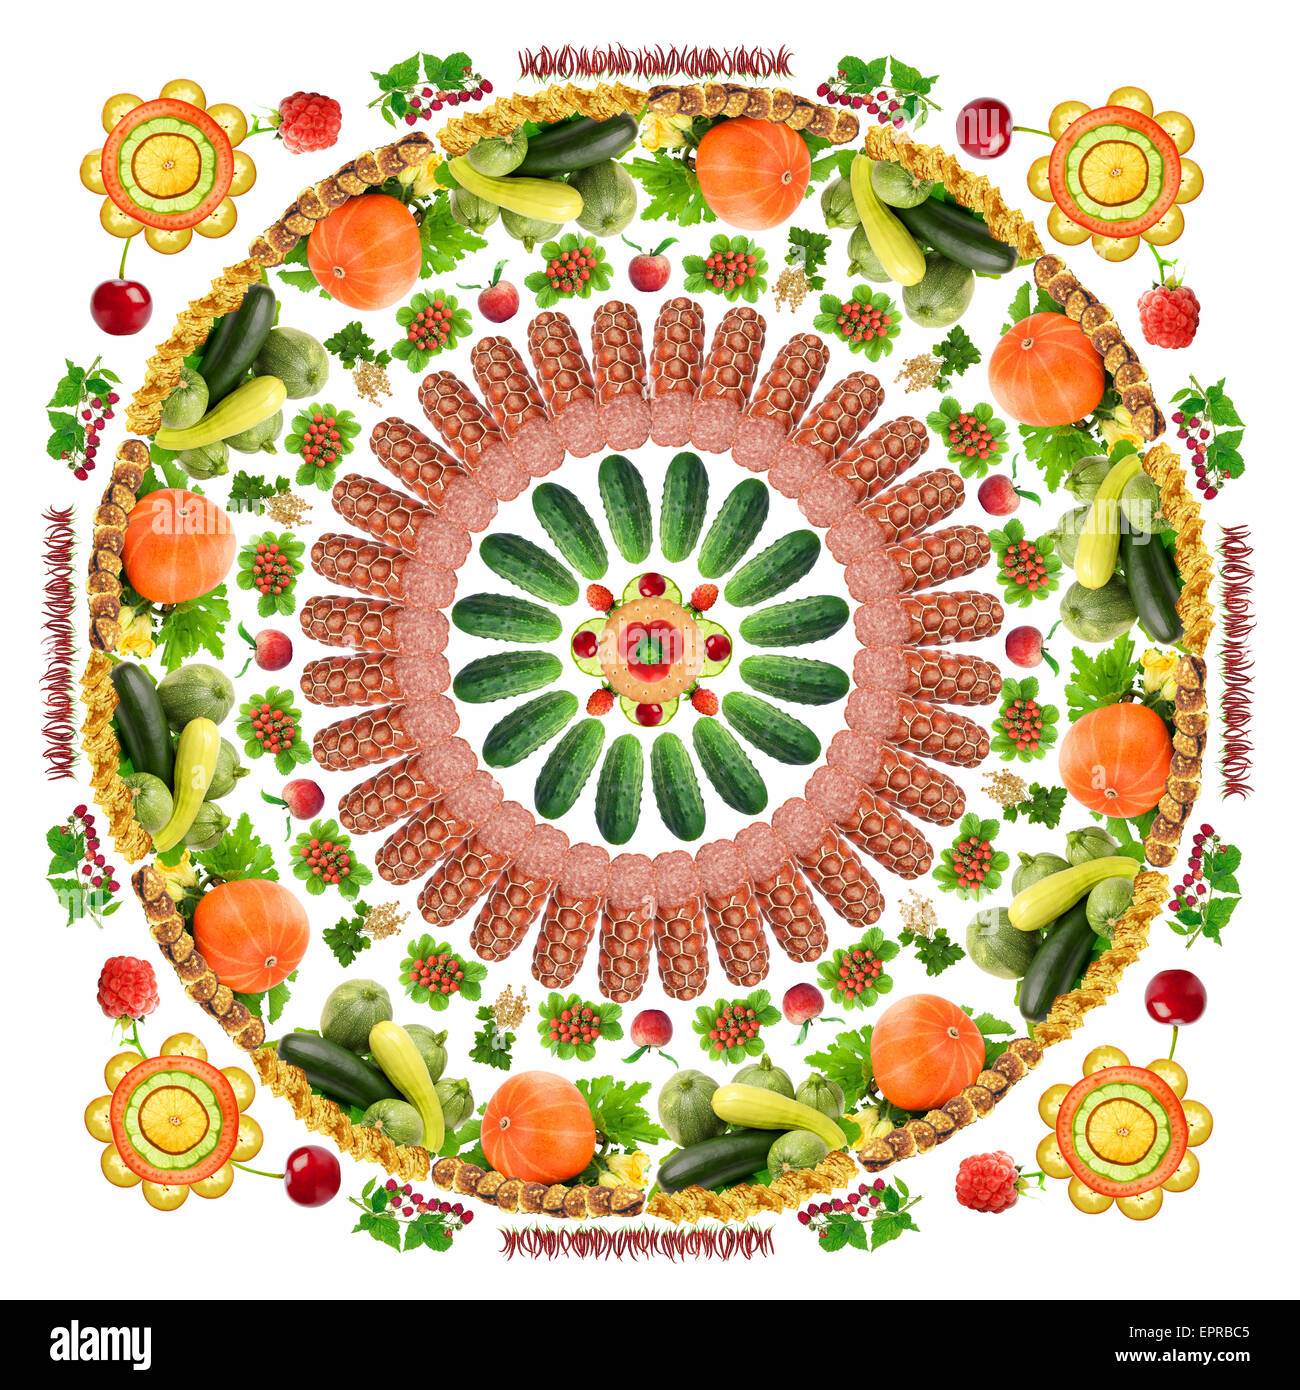 Square food abstract mandala made from fruits, vegetables, sausage and  pastries. Handmade isolated collage Stock Photo